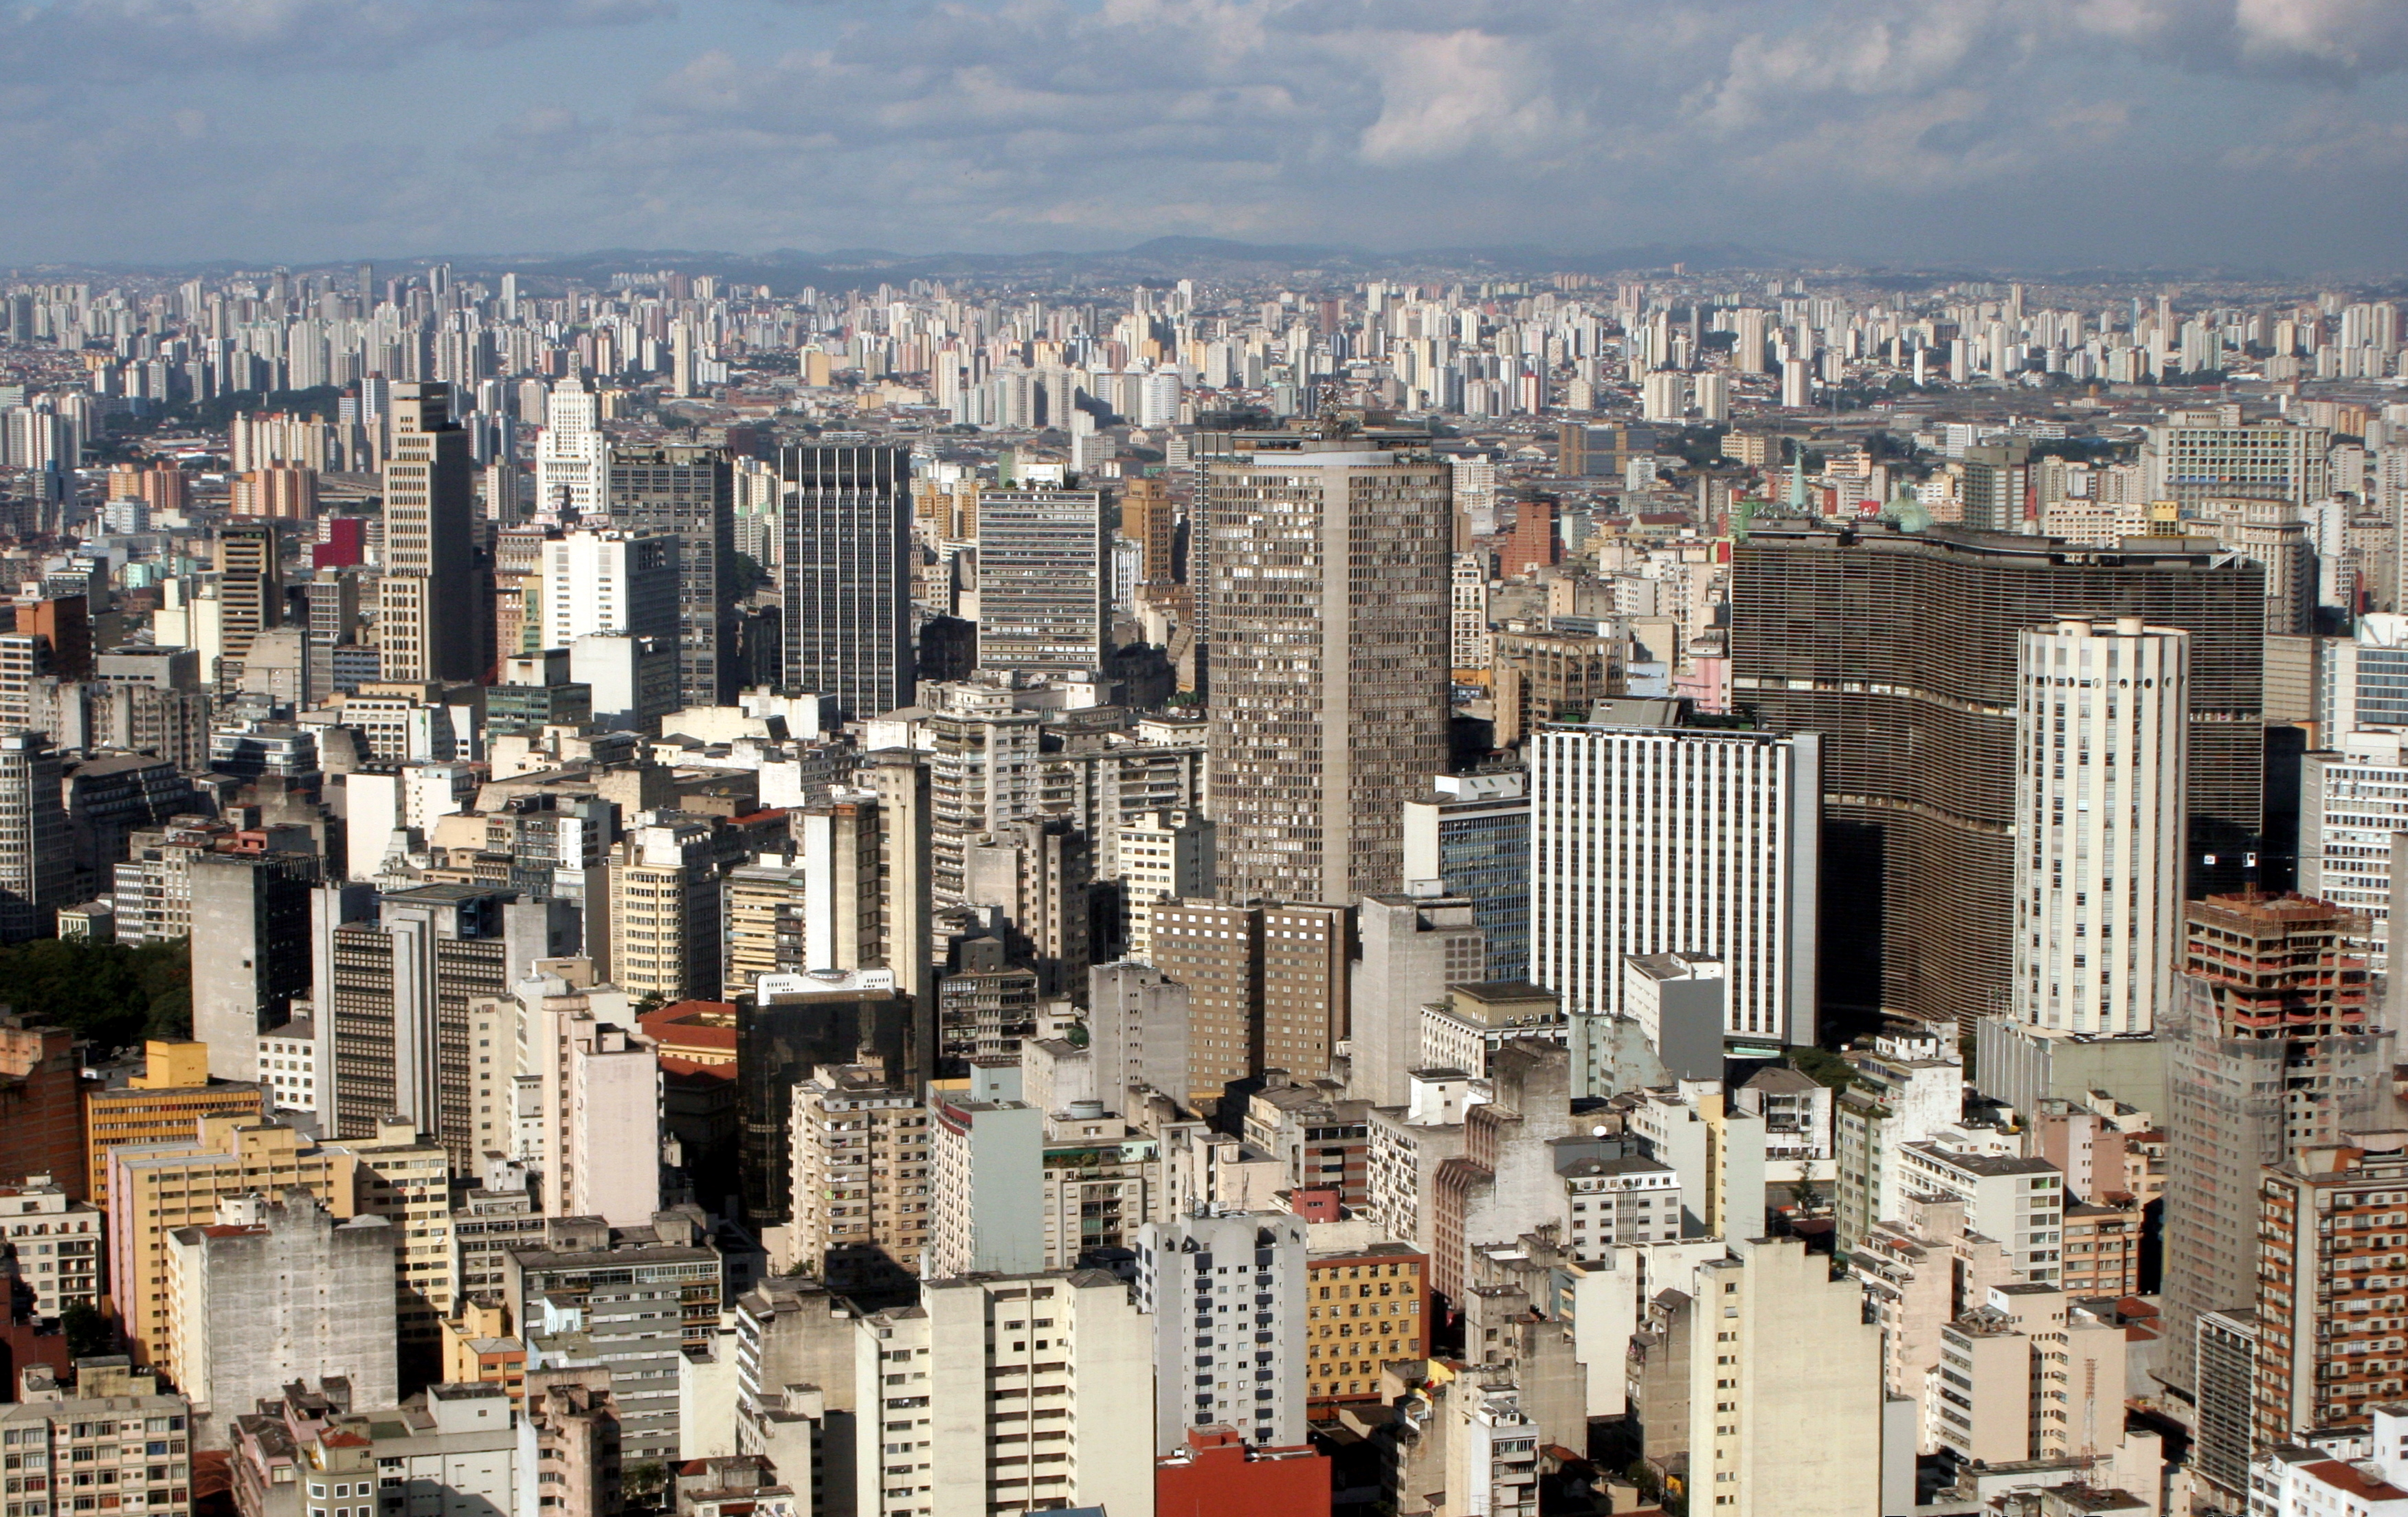 Sao Paulo, Brazil, Brazil News, Rio, Rio de Janeiro, Barra da Tijuca, Real Estate, People renting homes in 2018 grew by over five percent in relation to the previous year,